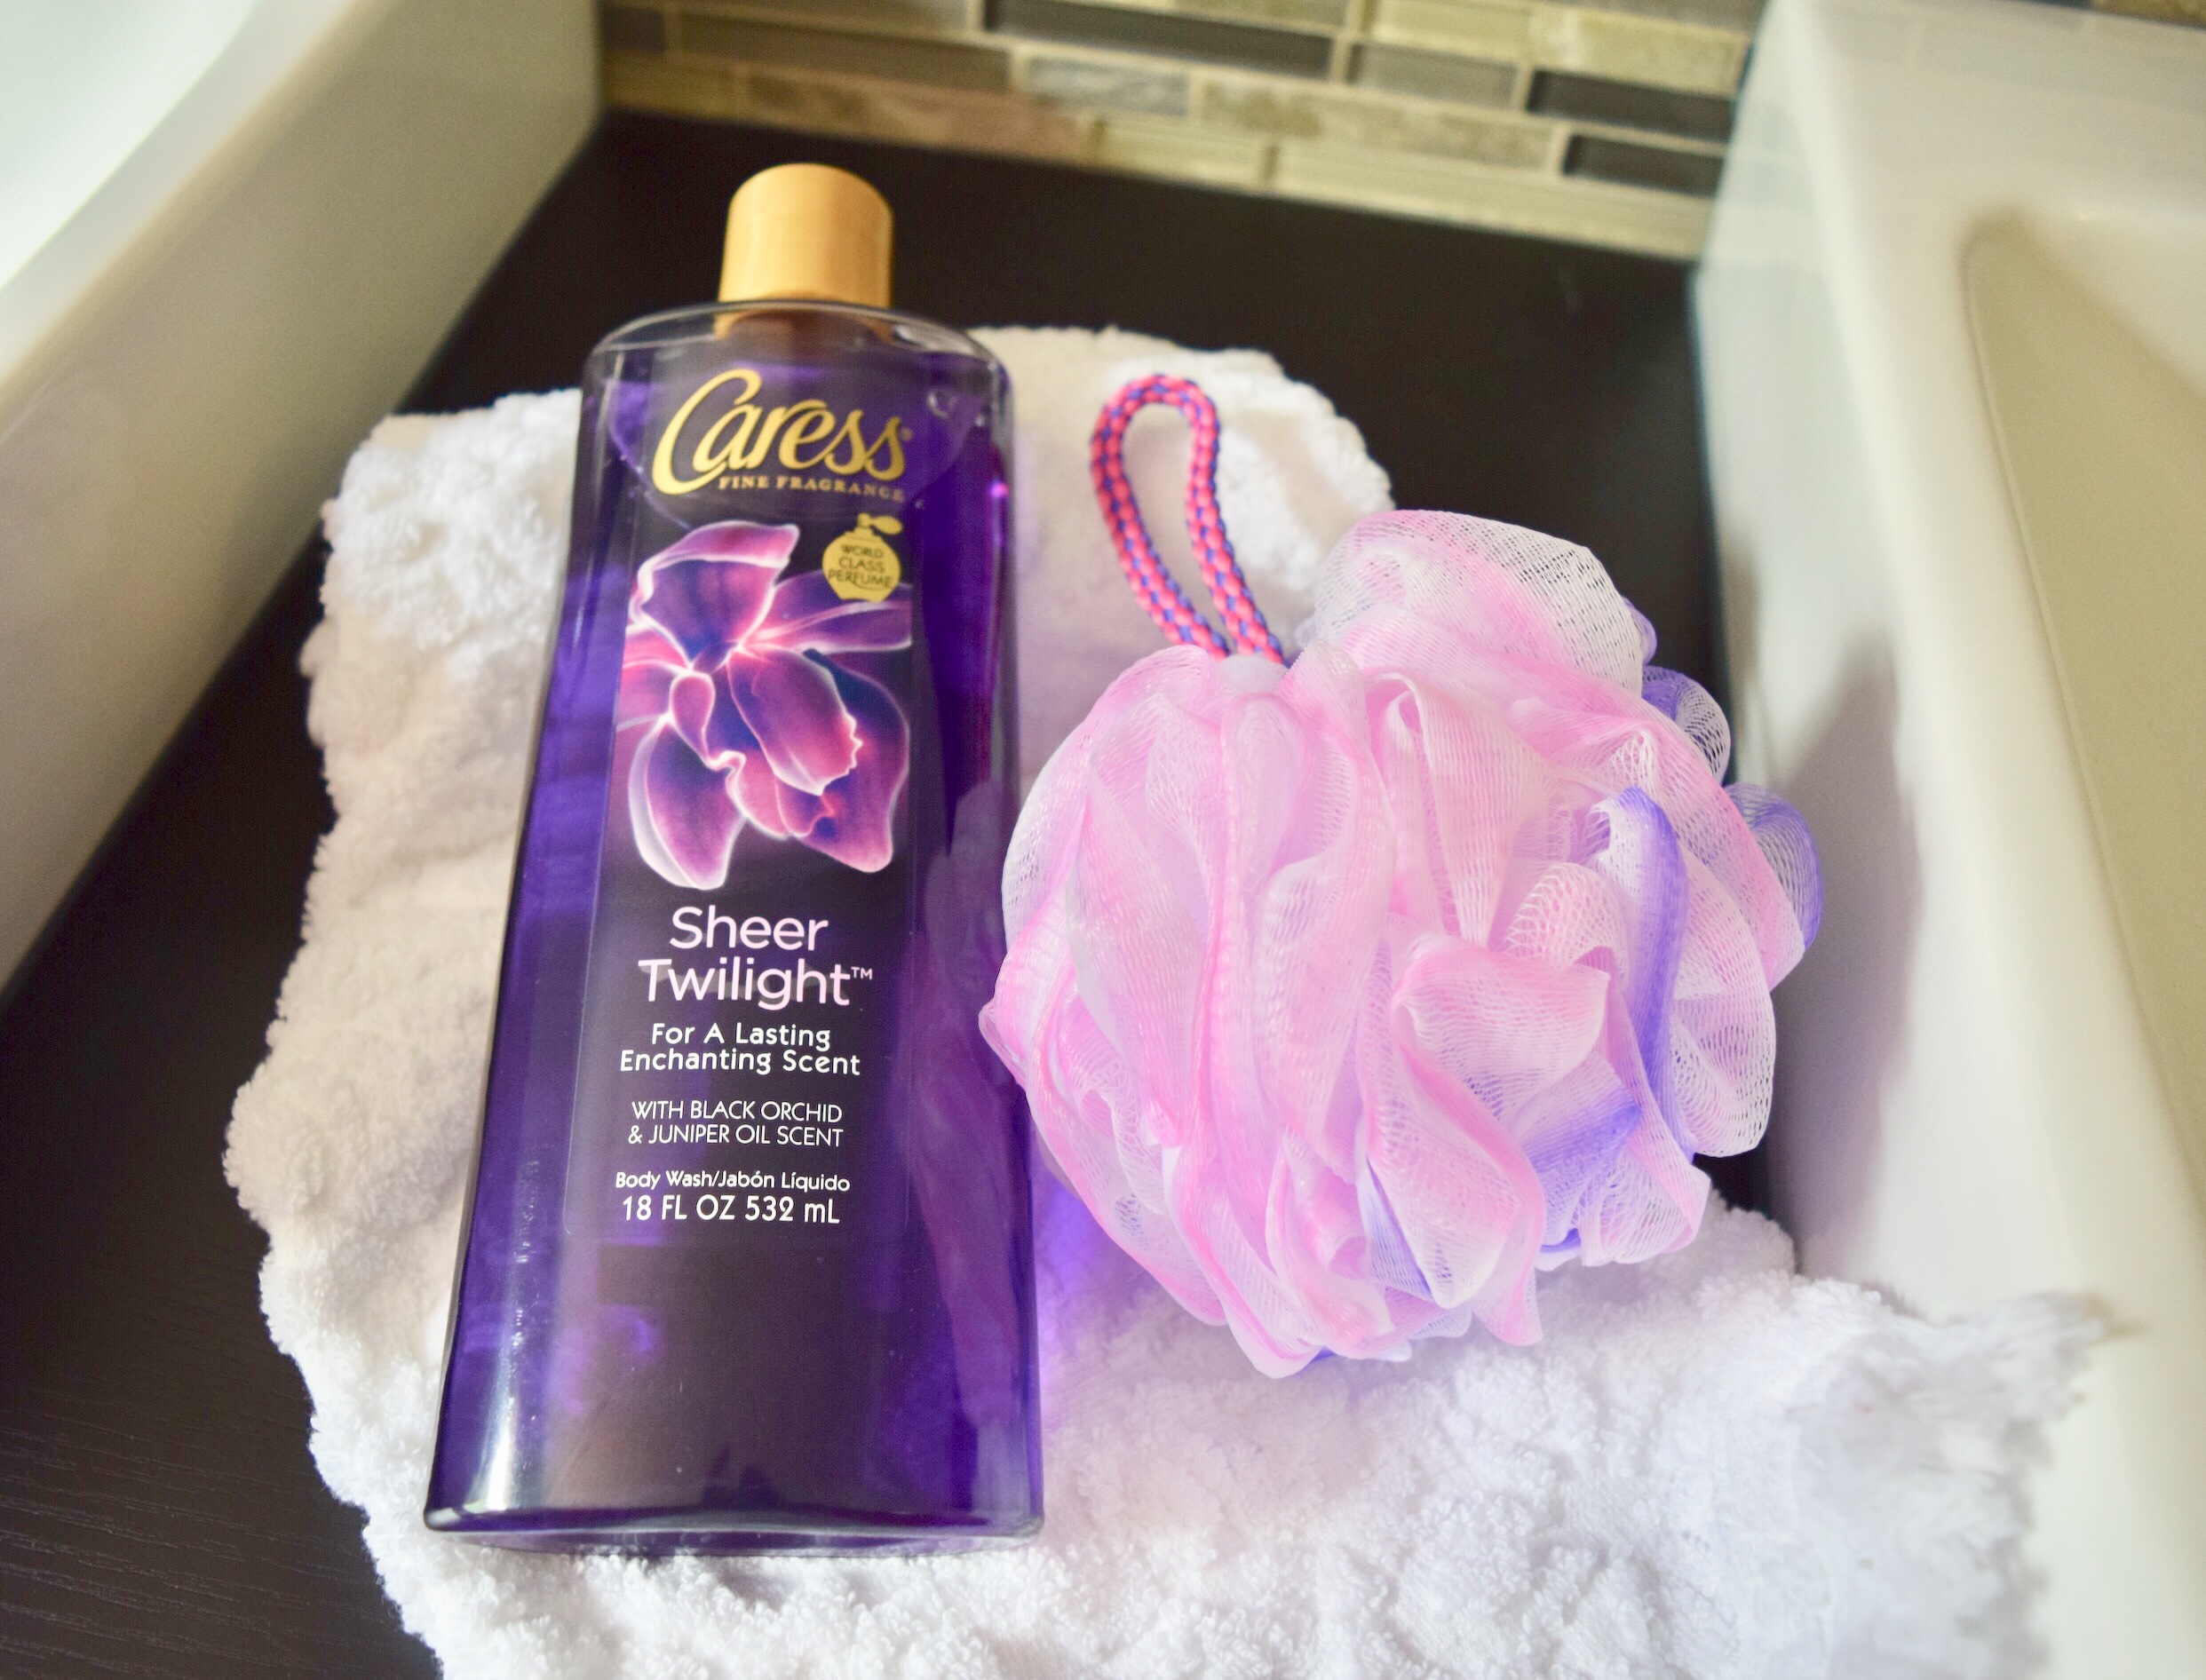 Don't have enough time for a bubble bath? Then, take a longer than normal shower instead and lather up with an amazing body wash like  Caress® Sheer Twilight™. #FDNewBeauty #ad #sponsored